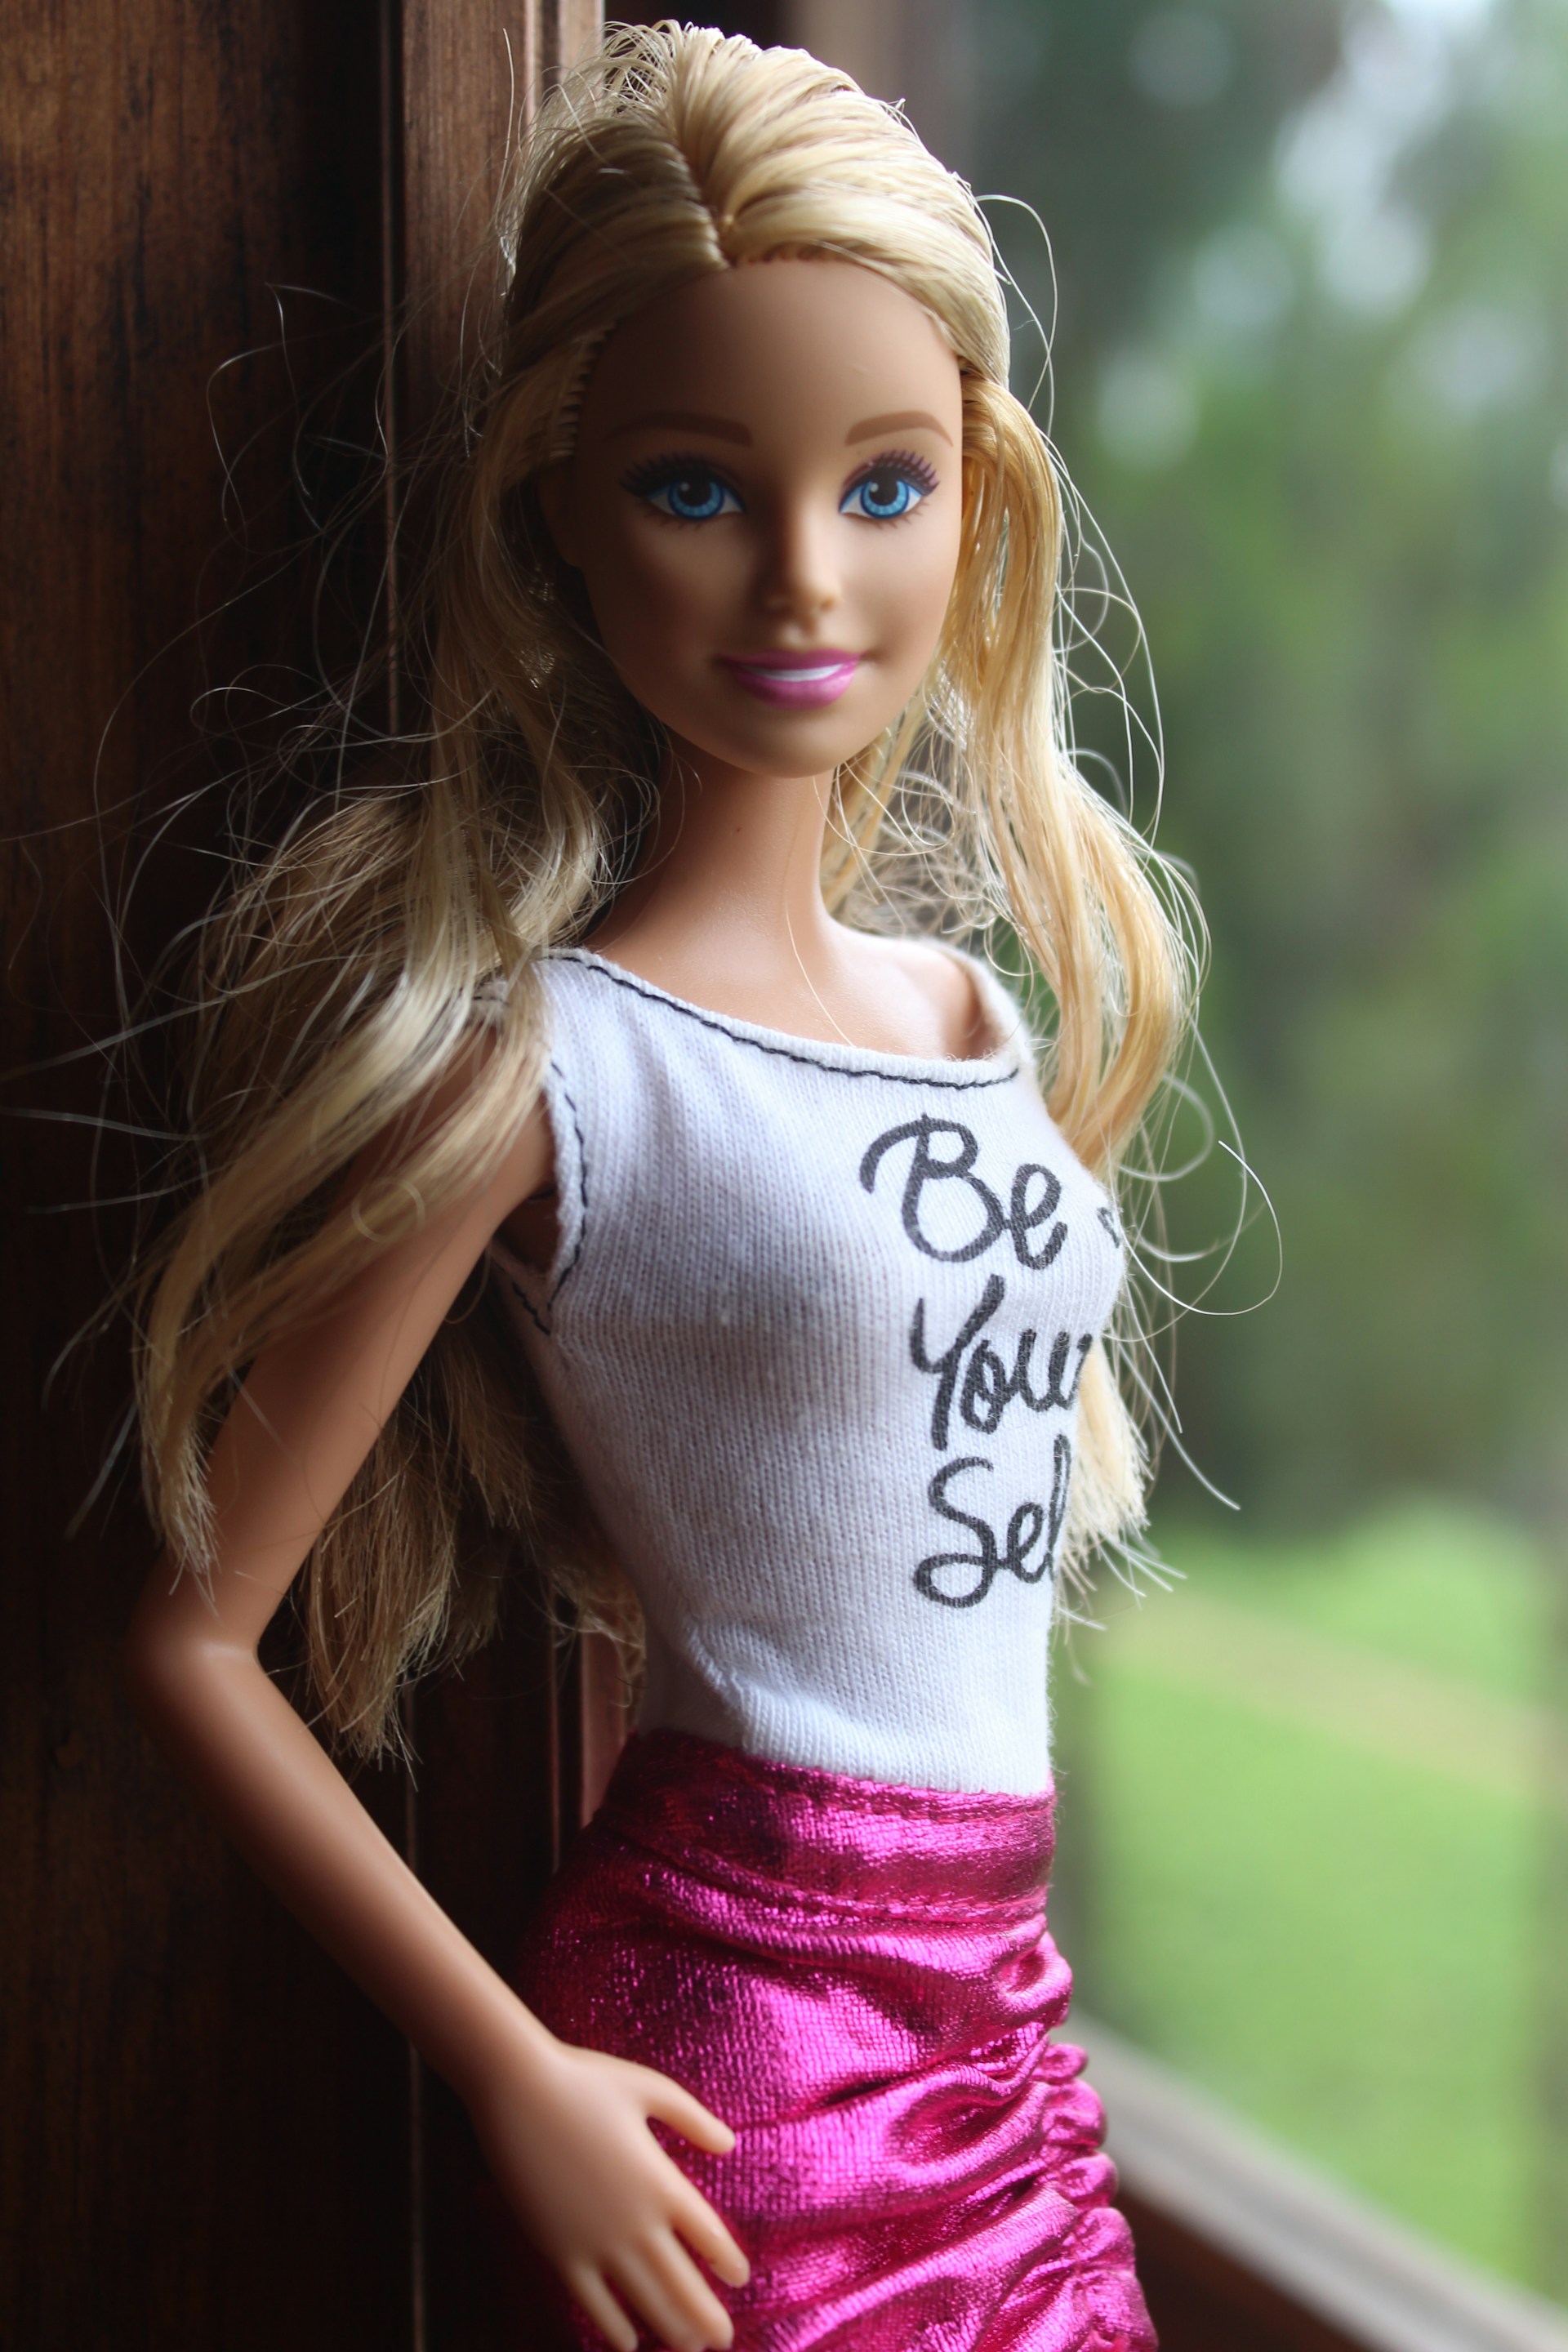 Close-up hoto of a Barbie doll posed in front of a window wearing a tanktop with the words 'Be Your Self'